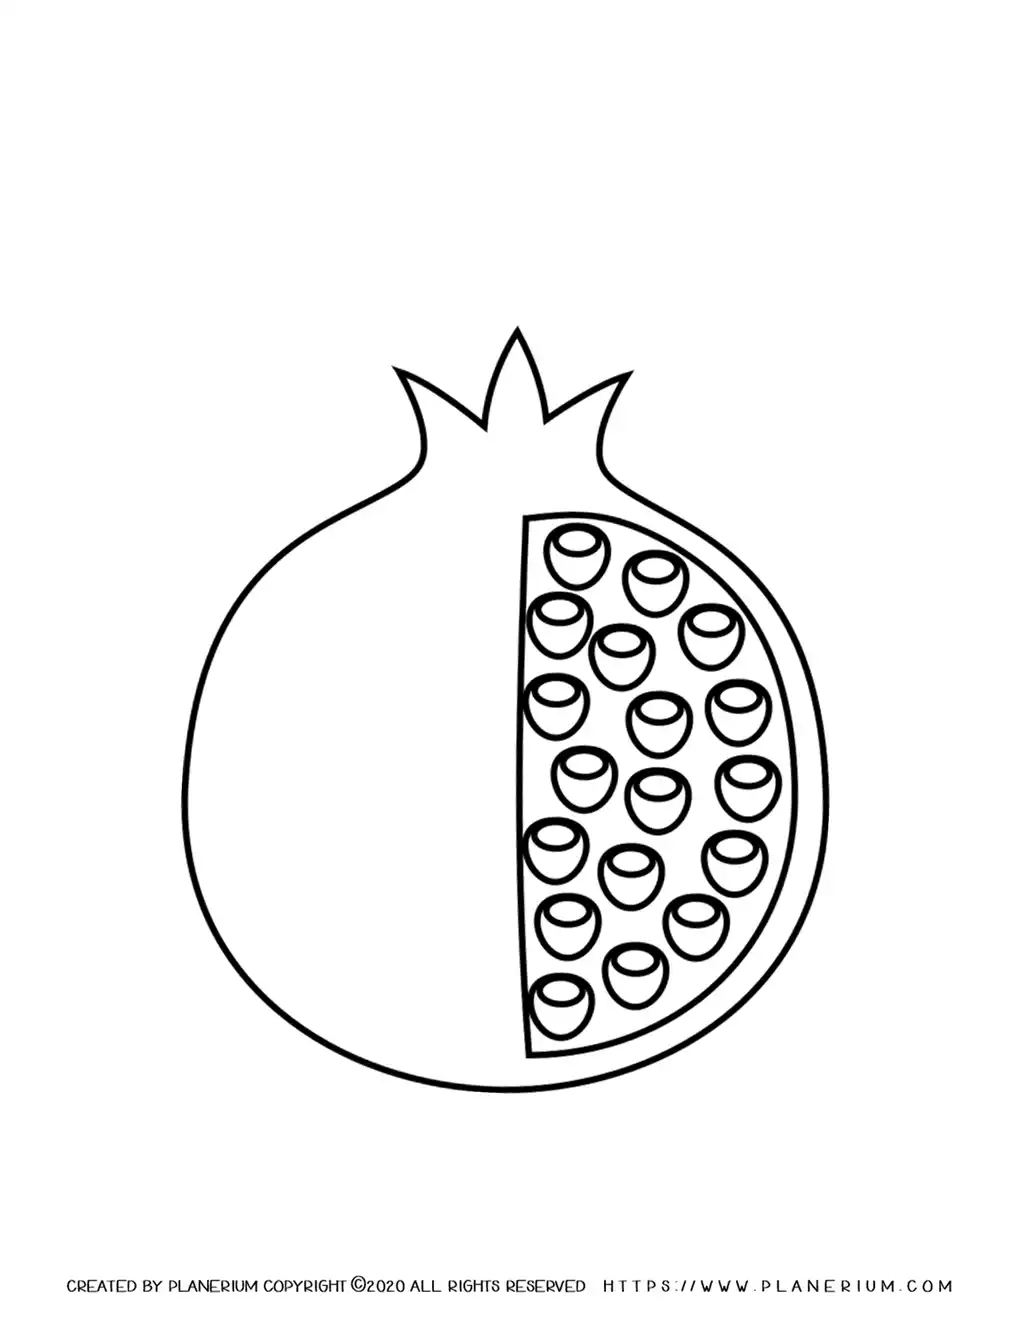 Rosh hashanah coloring pages pomegranate